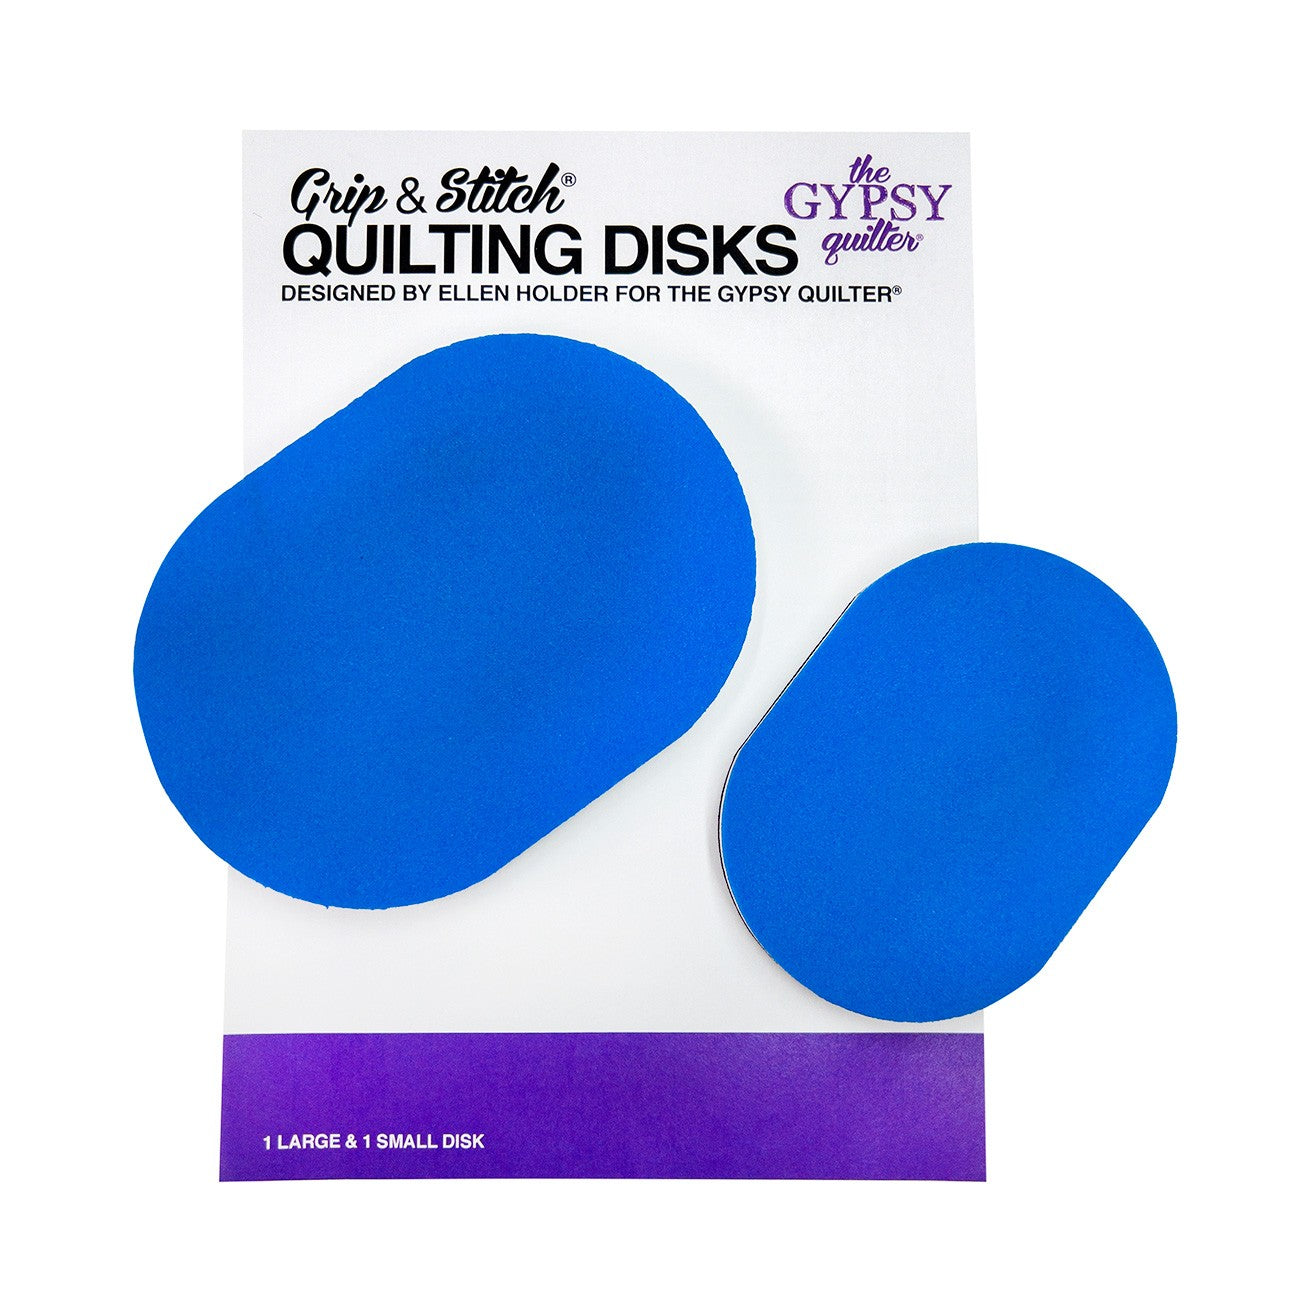 Grip & Stitch Quilting Disks by Ellen Holder for The Gypsy Quilter